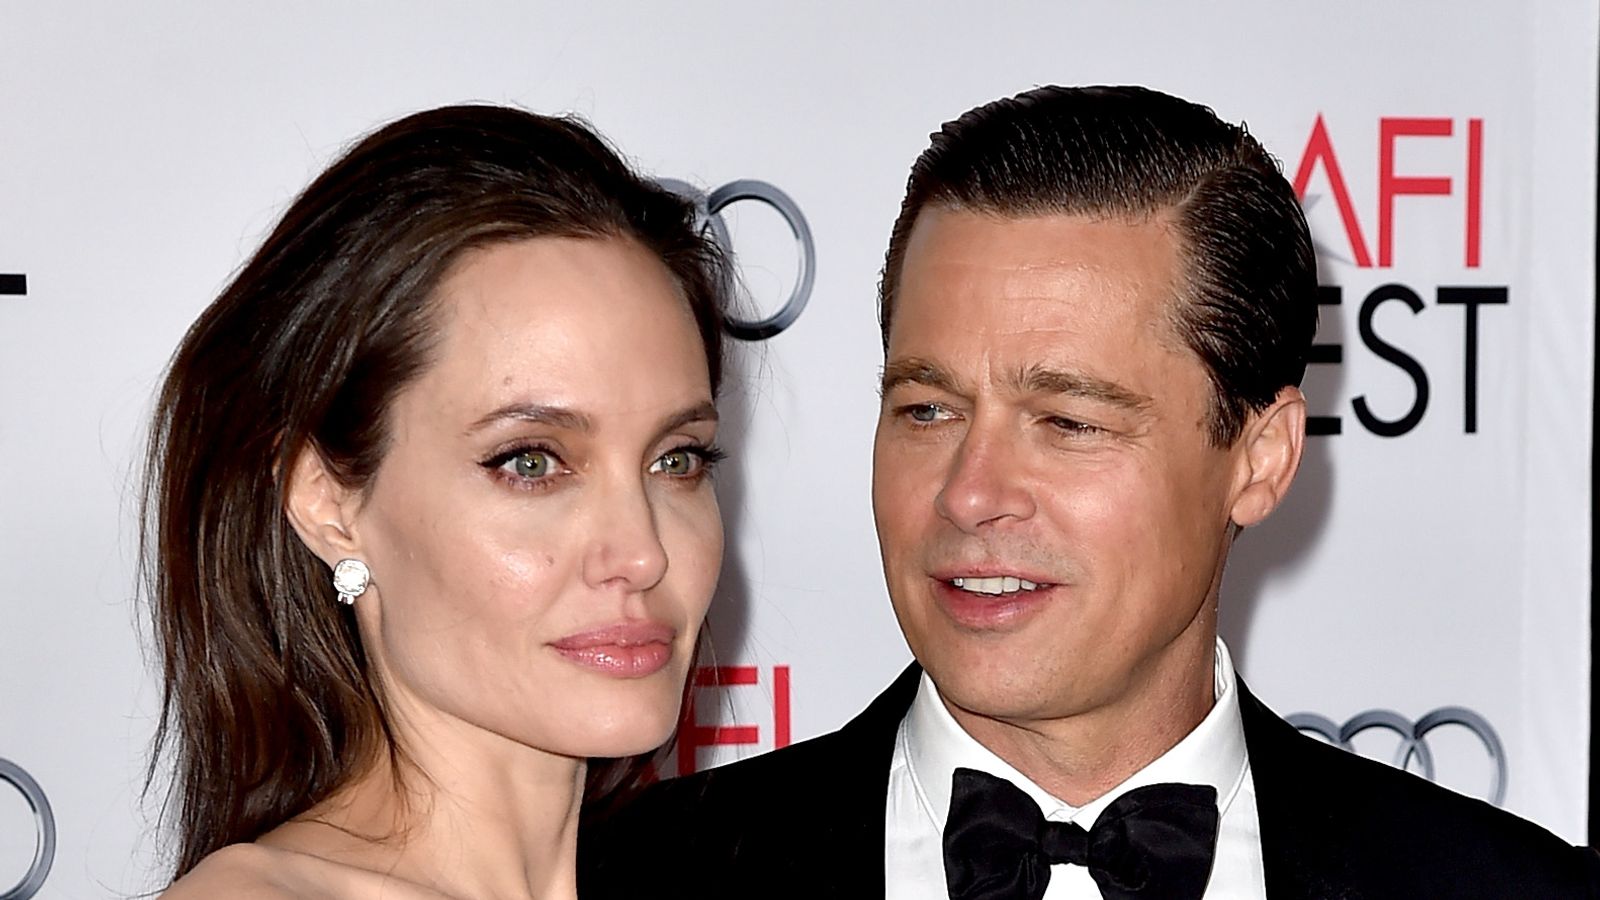 Angelina Jolie claimed Brad Pitt 'emotionally and physically' abused her and their children, new court filings show